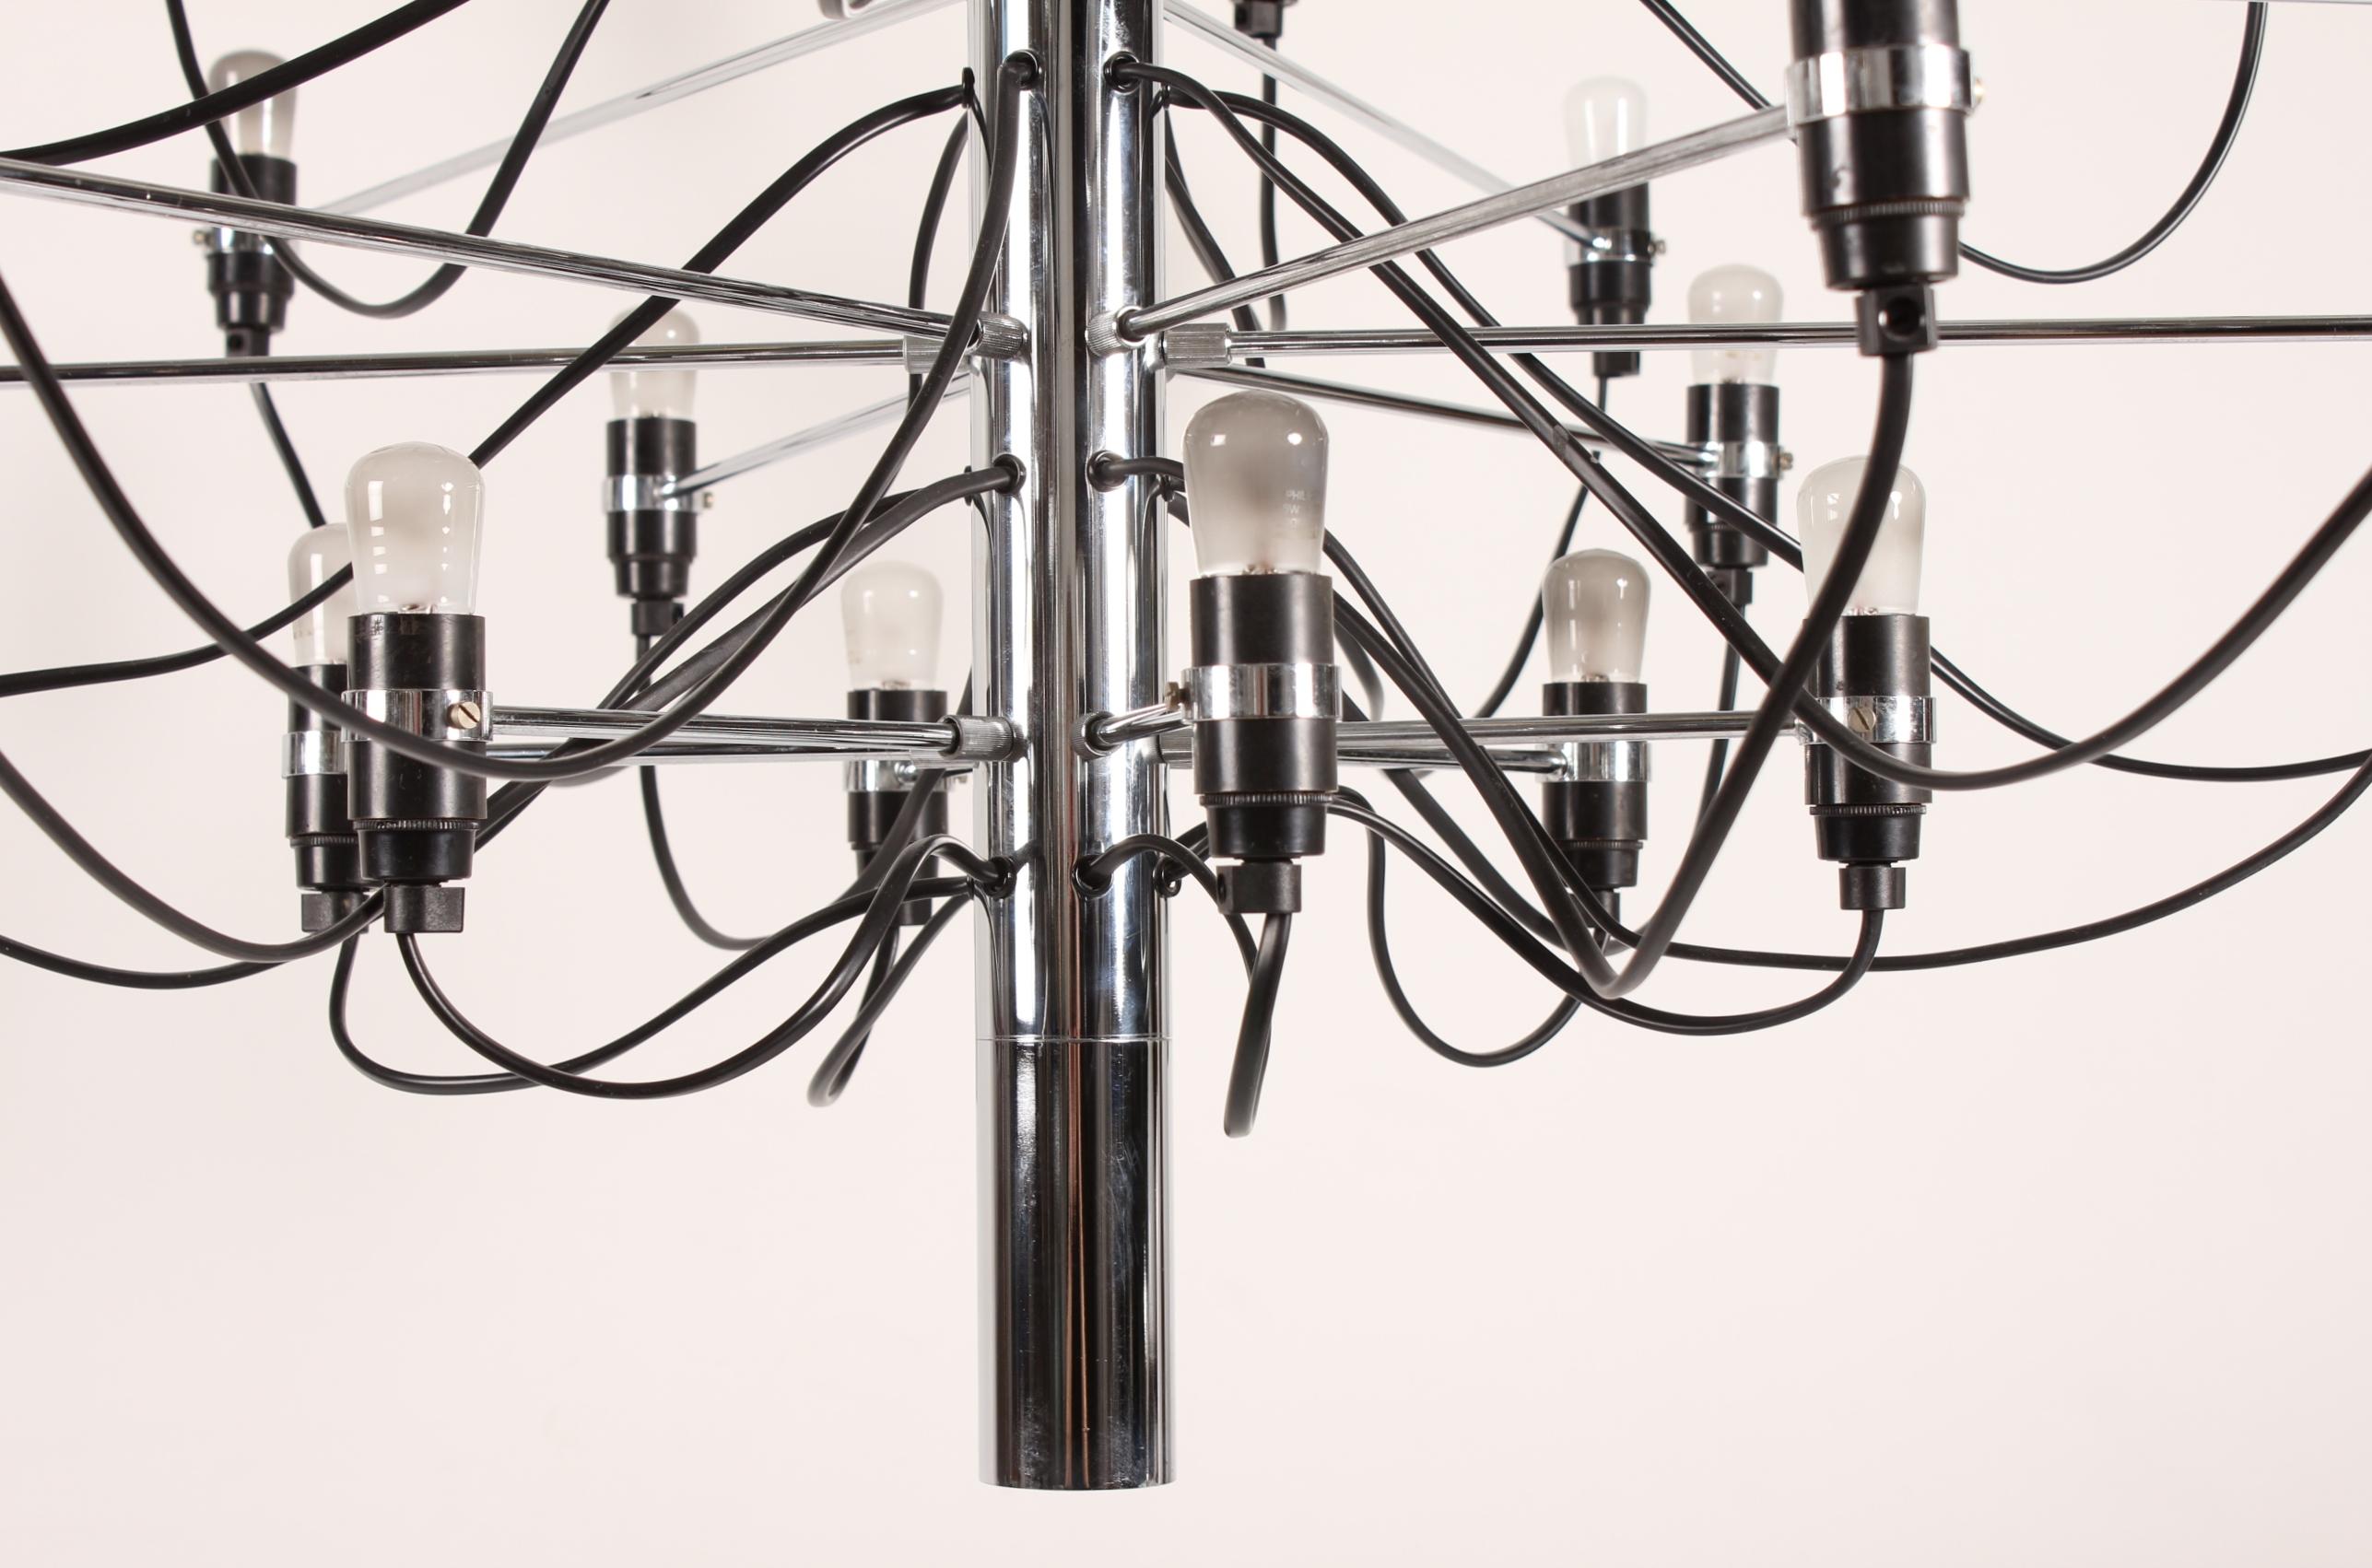 Large Gino Sarfatti (1912-1984) chandelier model 2097 with 30 arms and bulbs designed in 1958.
It's made of metal with chrome and made by Flos in the 1980s.

This chandelier, with its light and simple expression, will fit well in an Art Deco